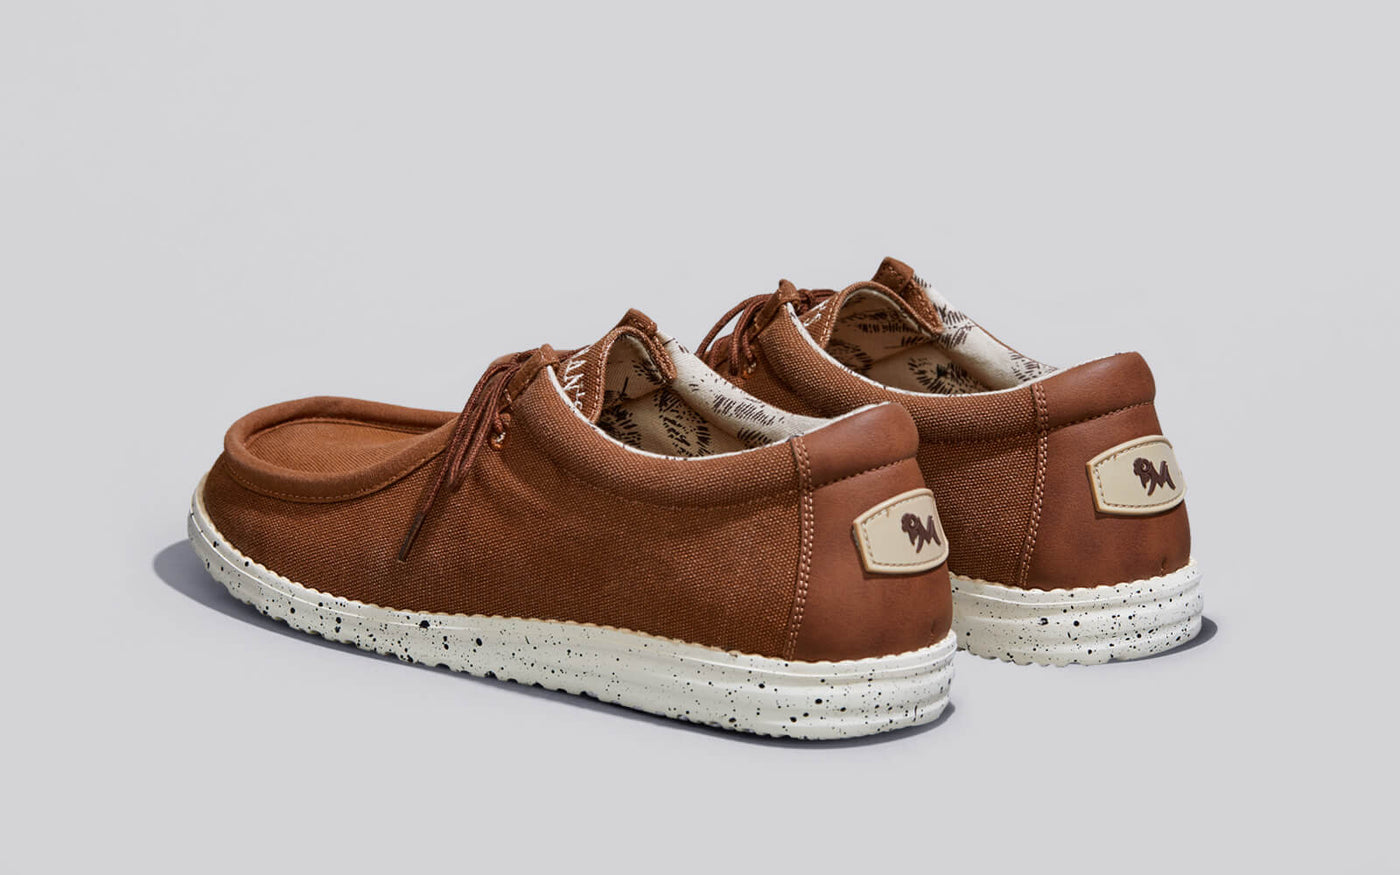 The Wanderers Sneakers